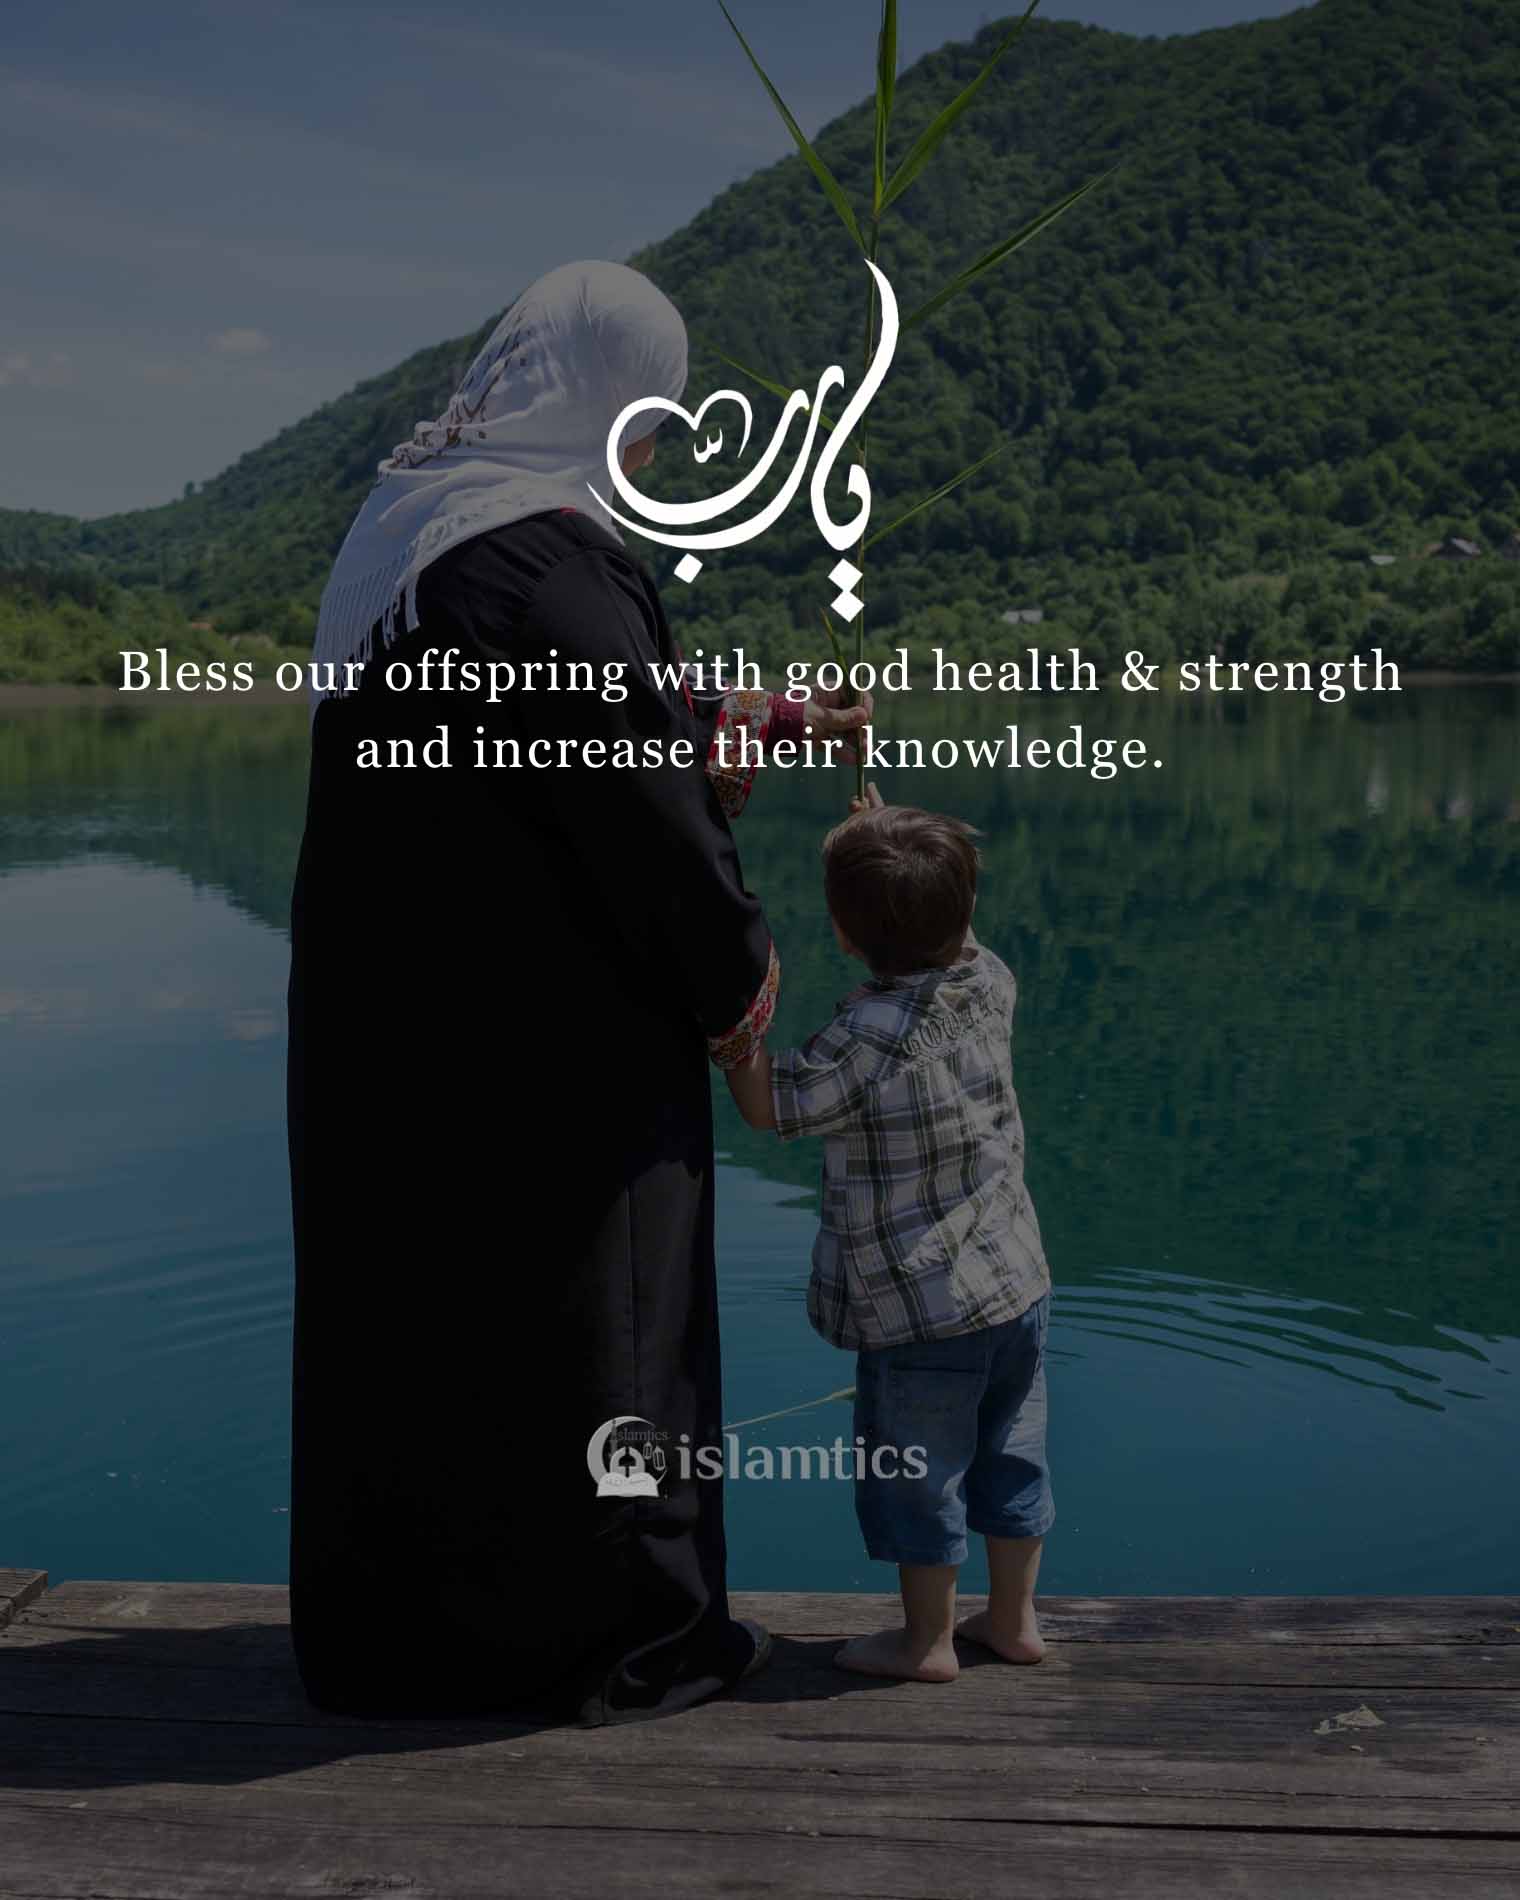  𝗬𝗮 𝗔𝗹𝗹𝗮𝗵.. bless our offspring with good health & strength